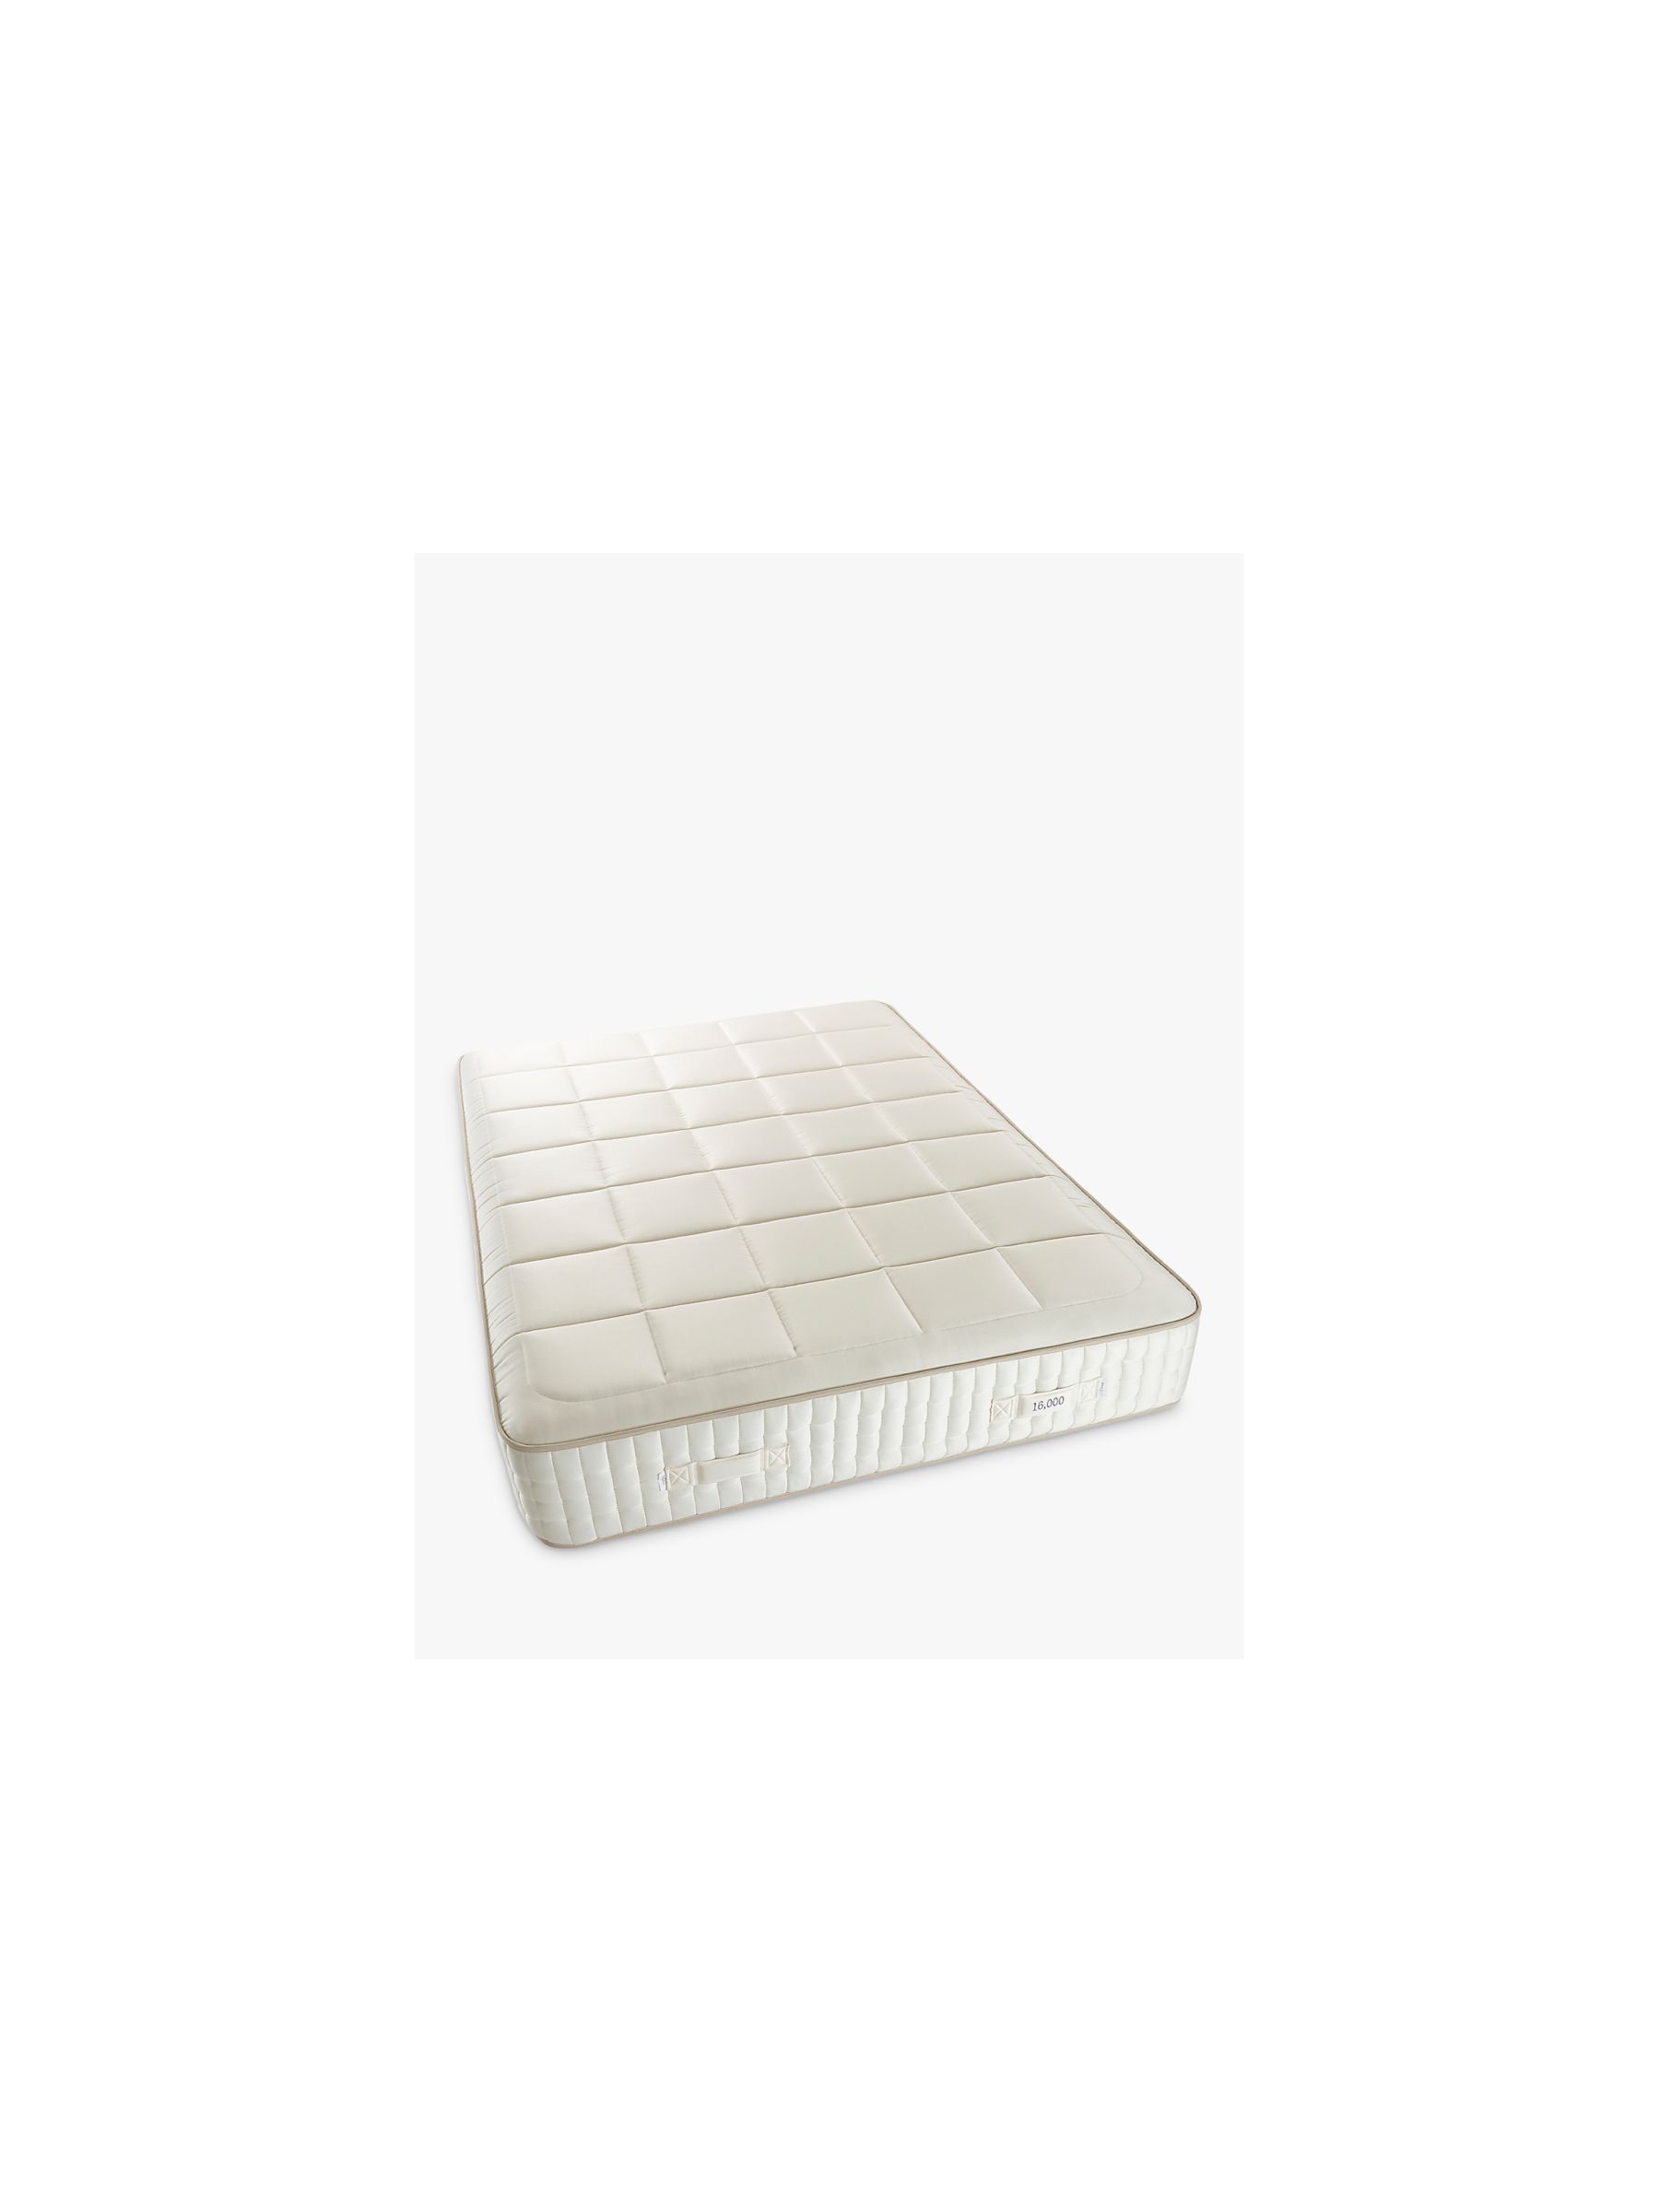 Photo of John lewis luxury natural collection mohair quilted 16000 double regular tension pocket spring mattress